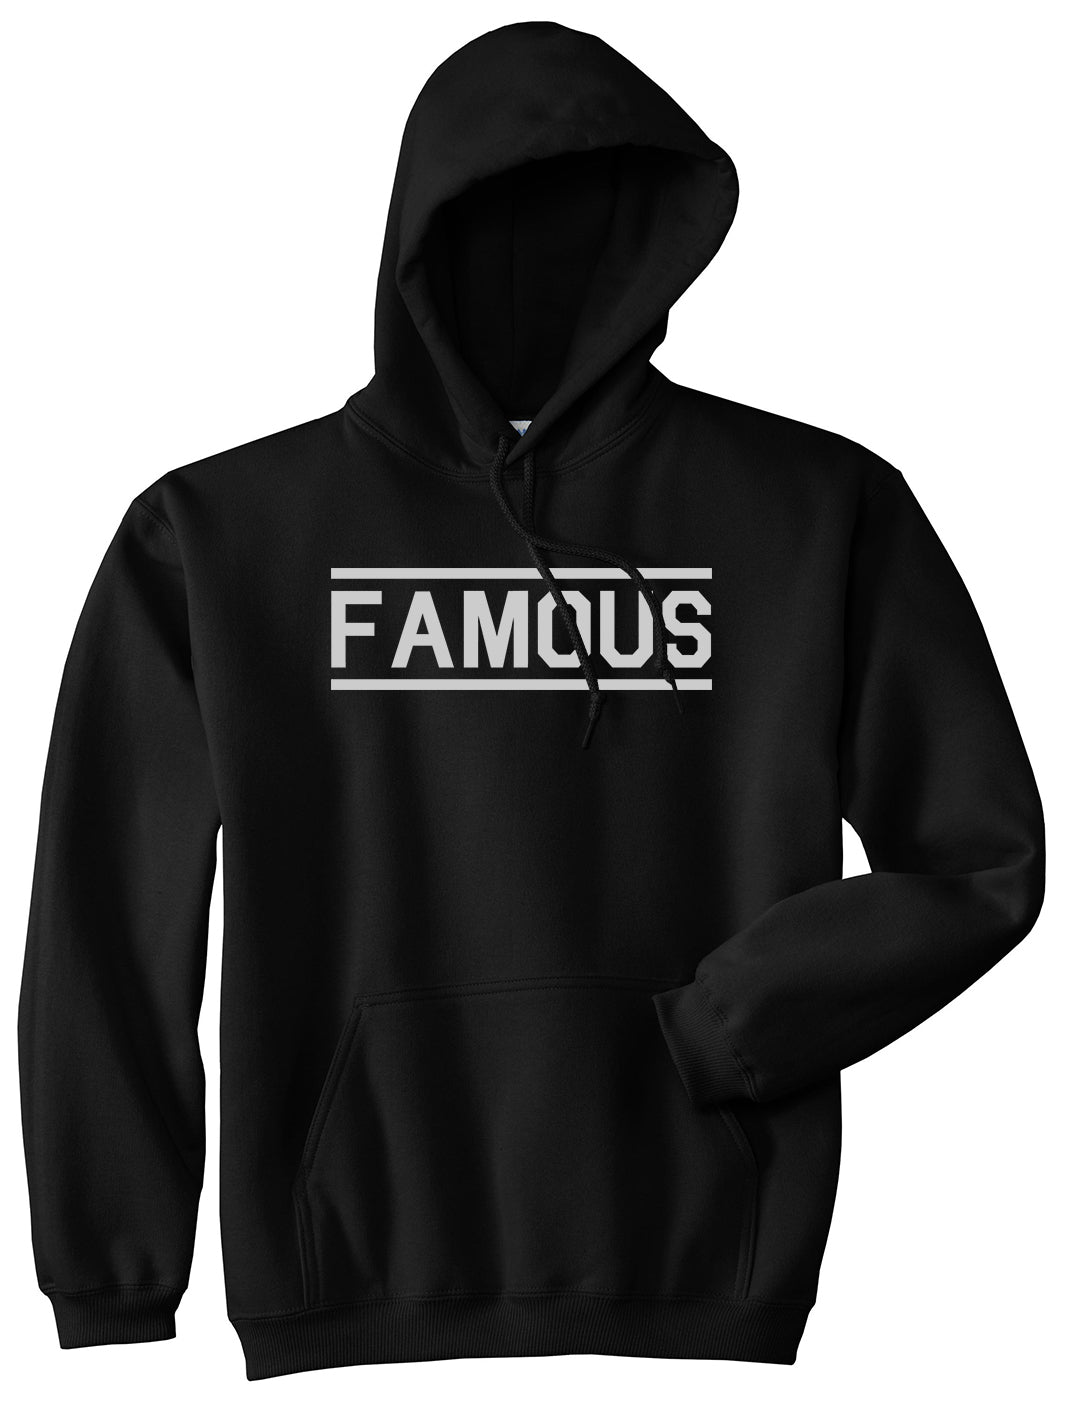 Famous Mens Black Pullover Hoodie by KINGS OF NY